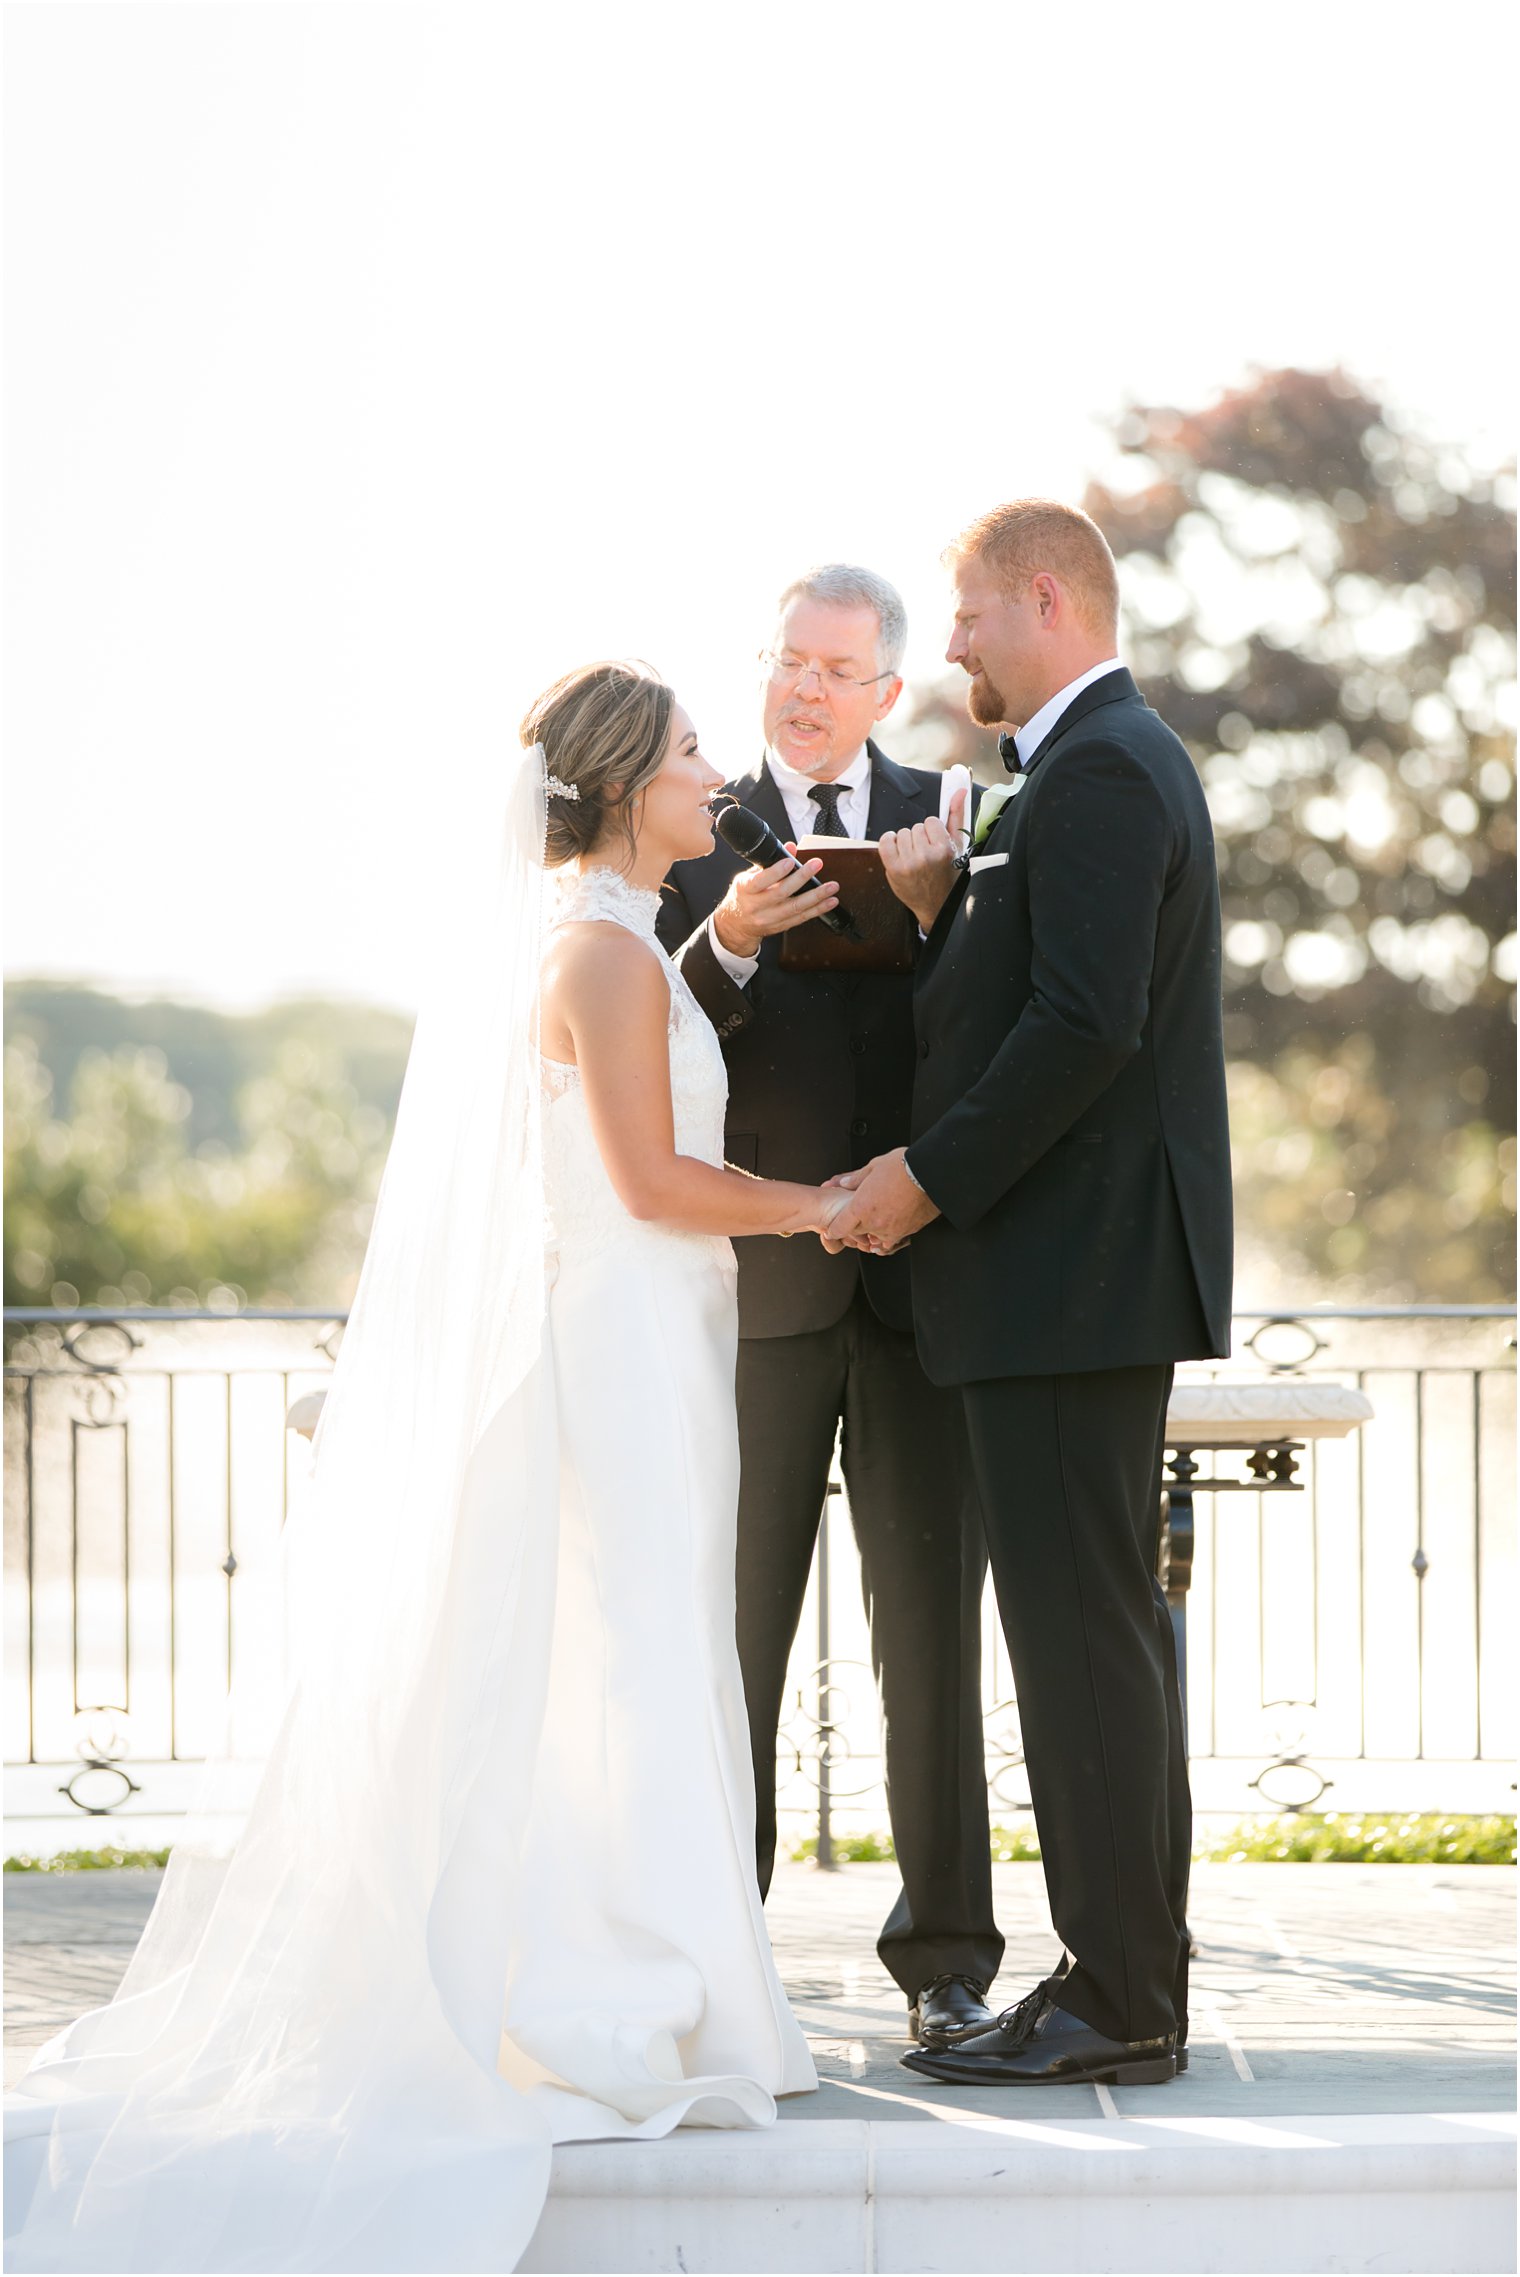 Outdoor wedding ceremony at Park Chateau Estate and Gardens